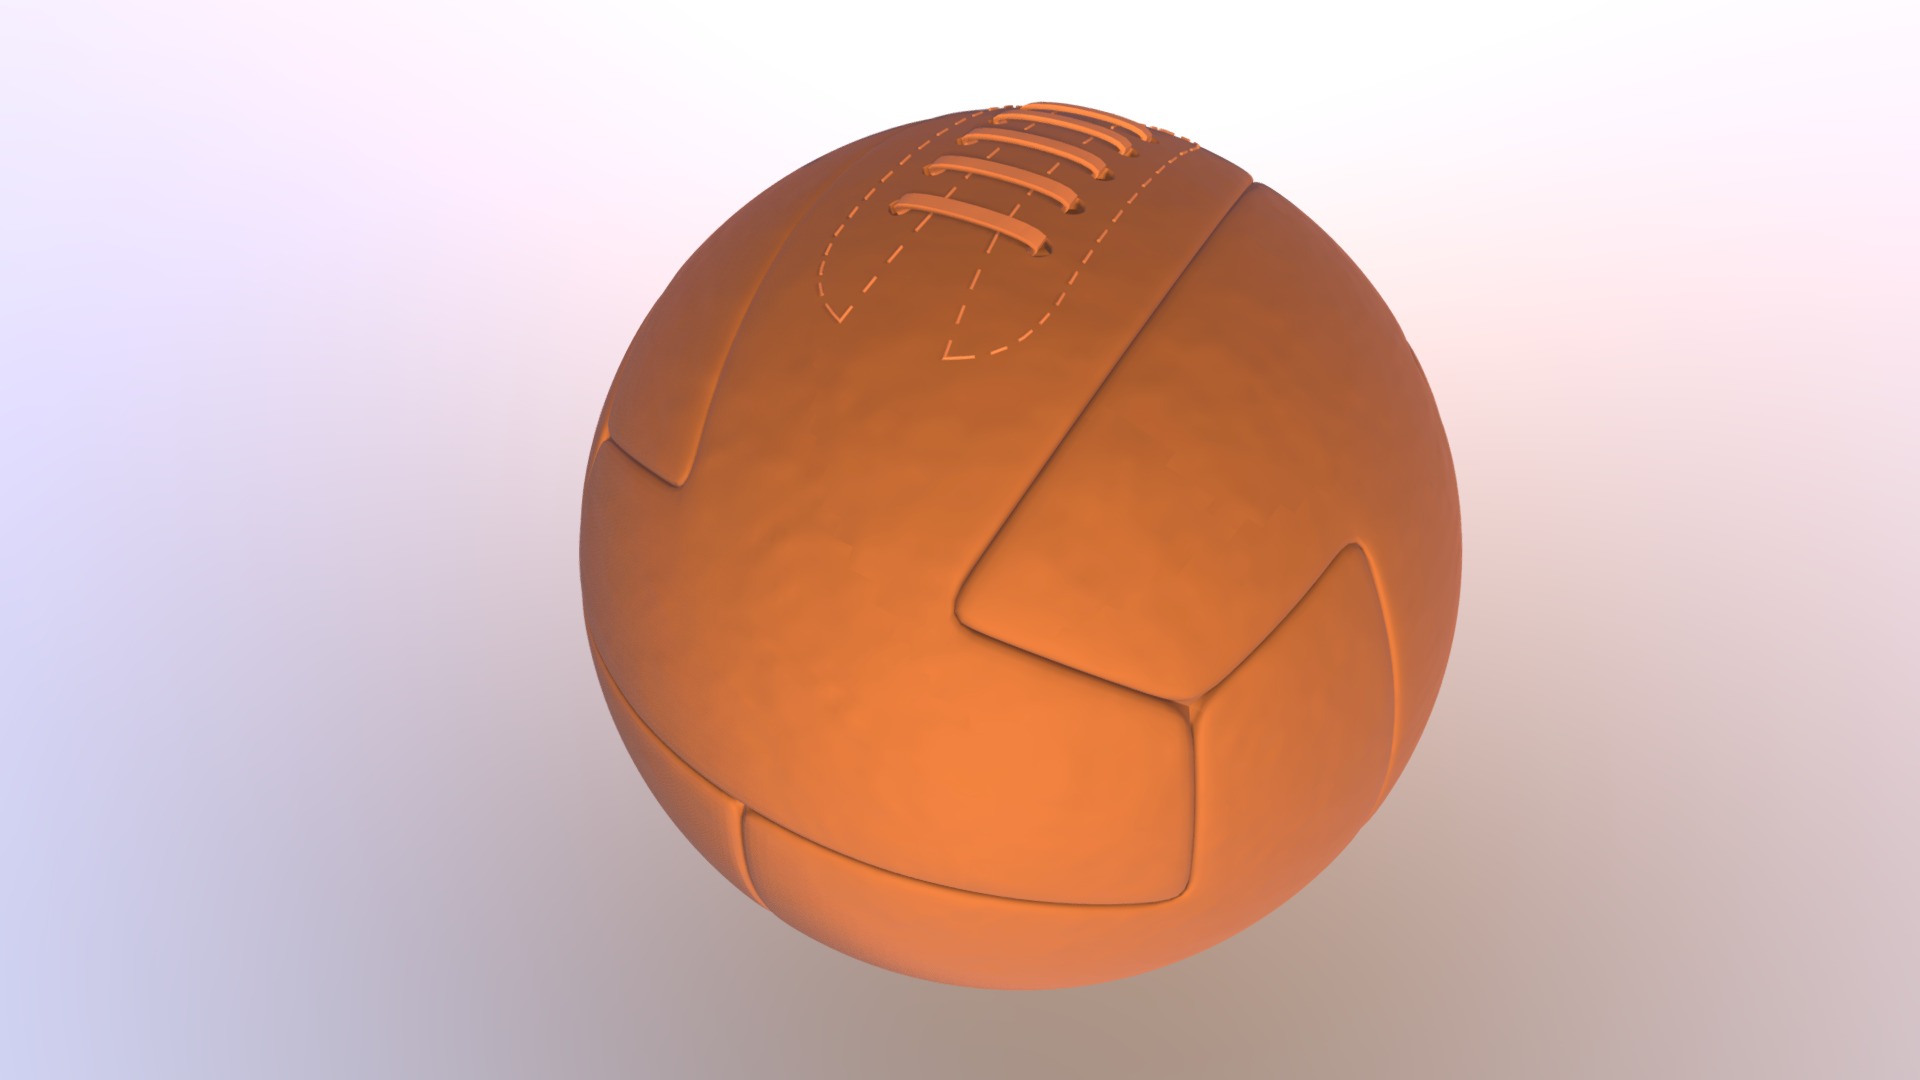 3D model Old Soccer Ball - This is a 3D model of the Old Soccer Ball. The 3D model is about a basketball on a white background.